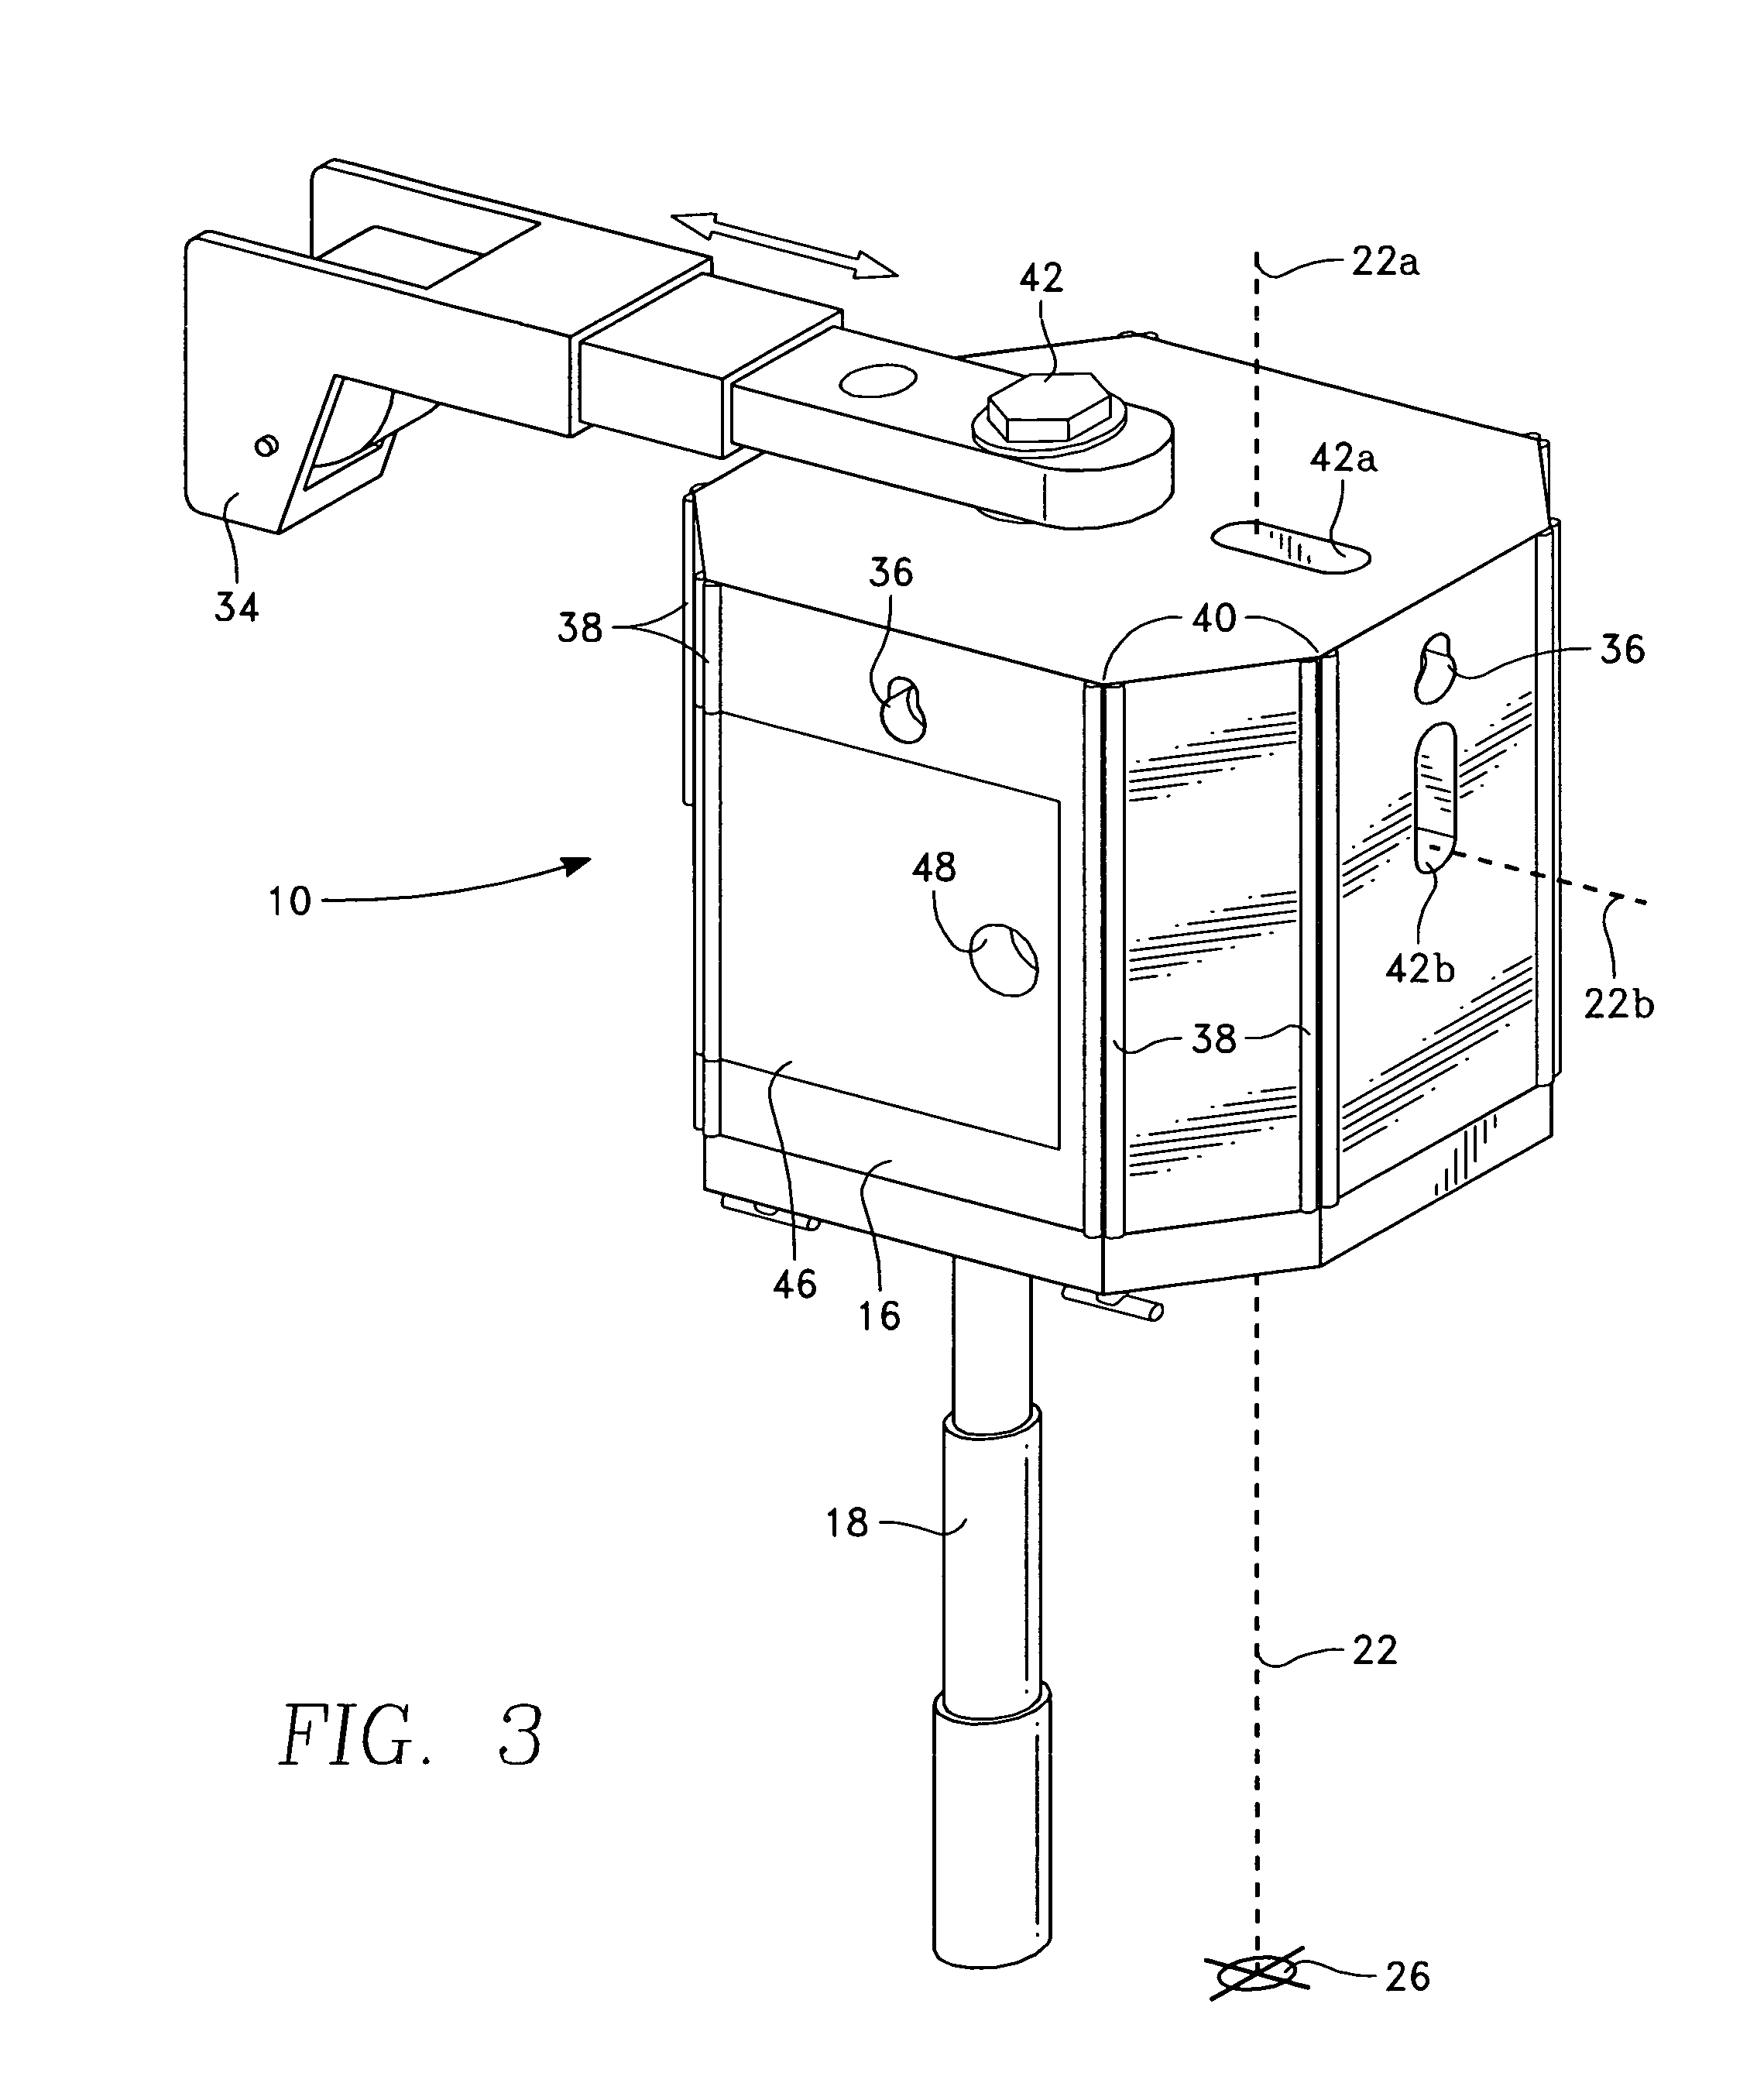 Elevated laser beam positioning device